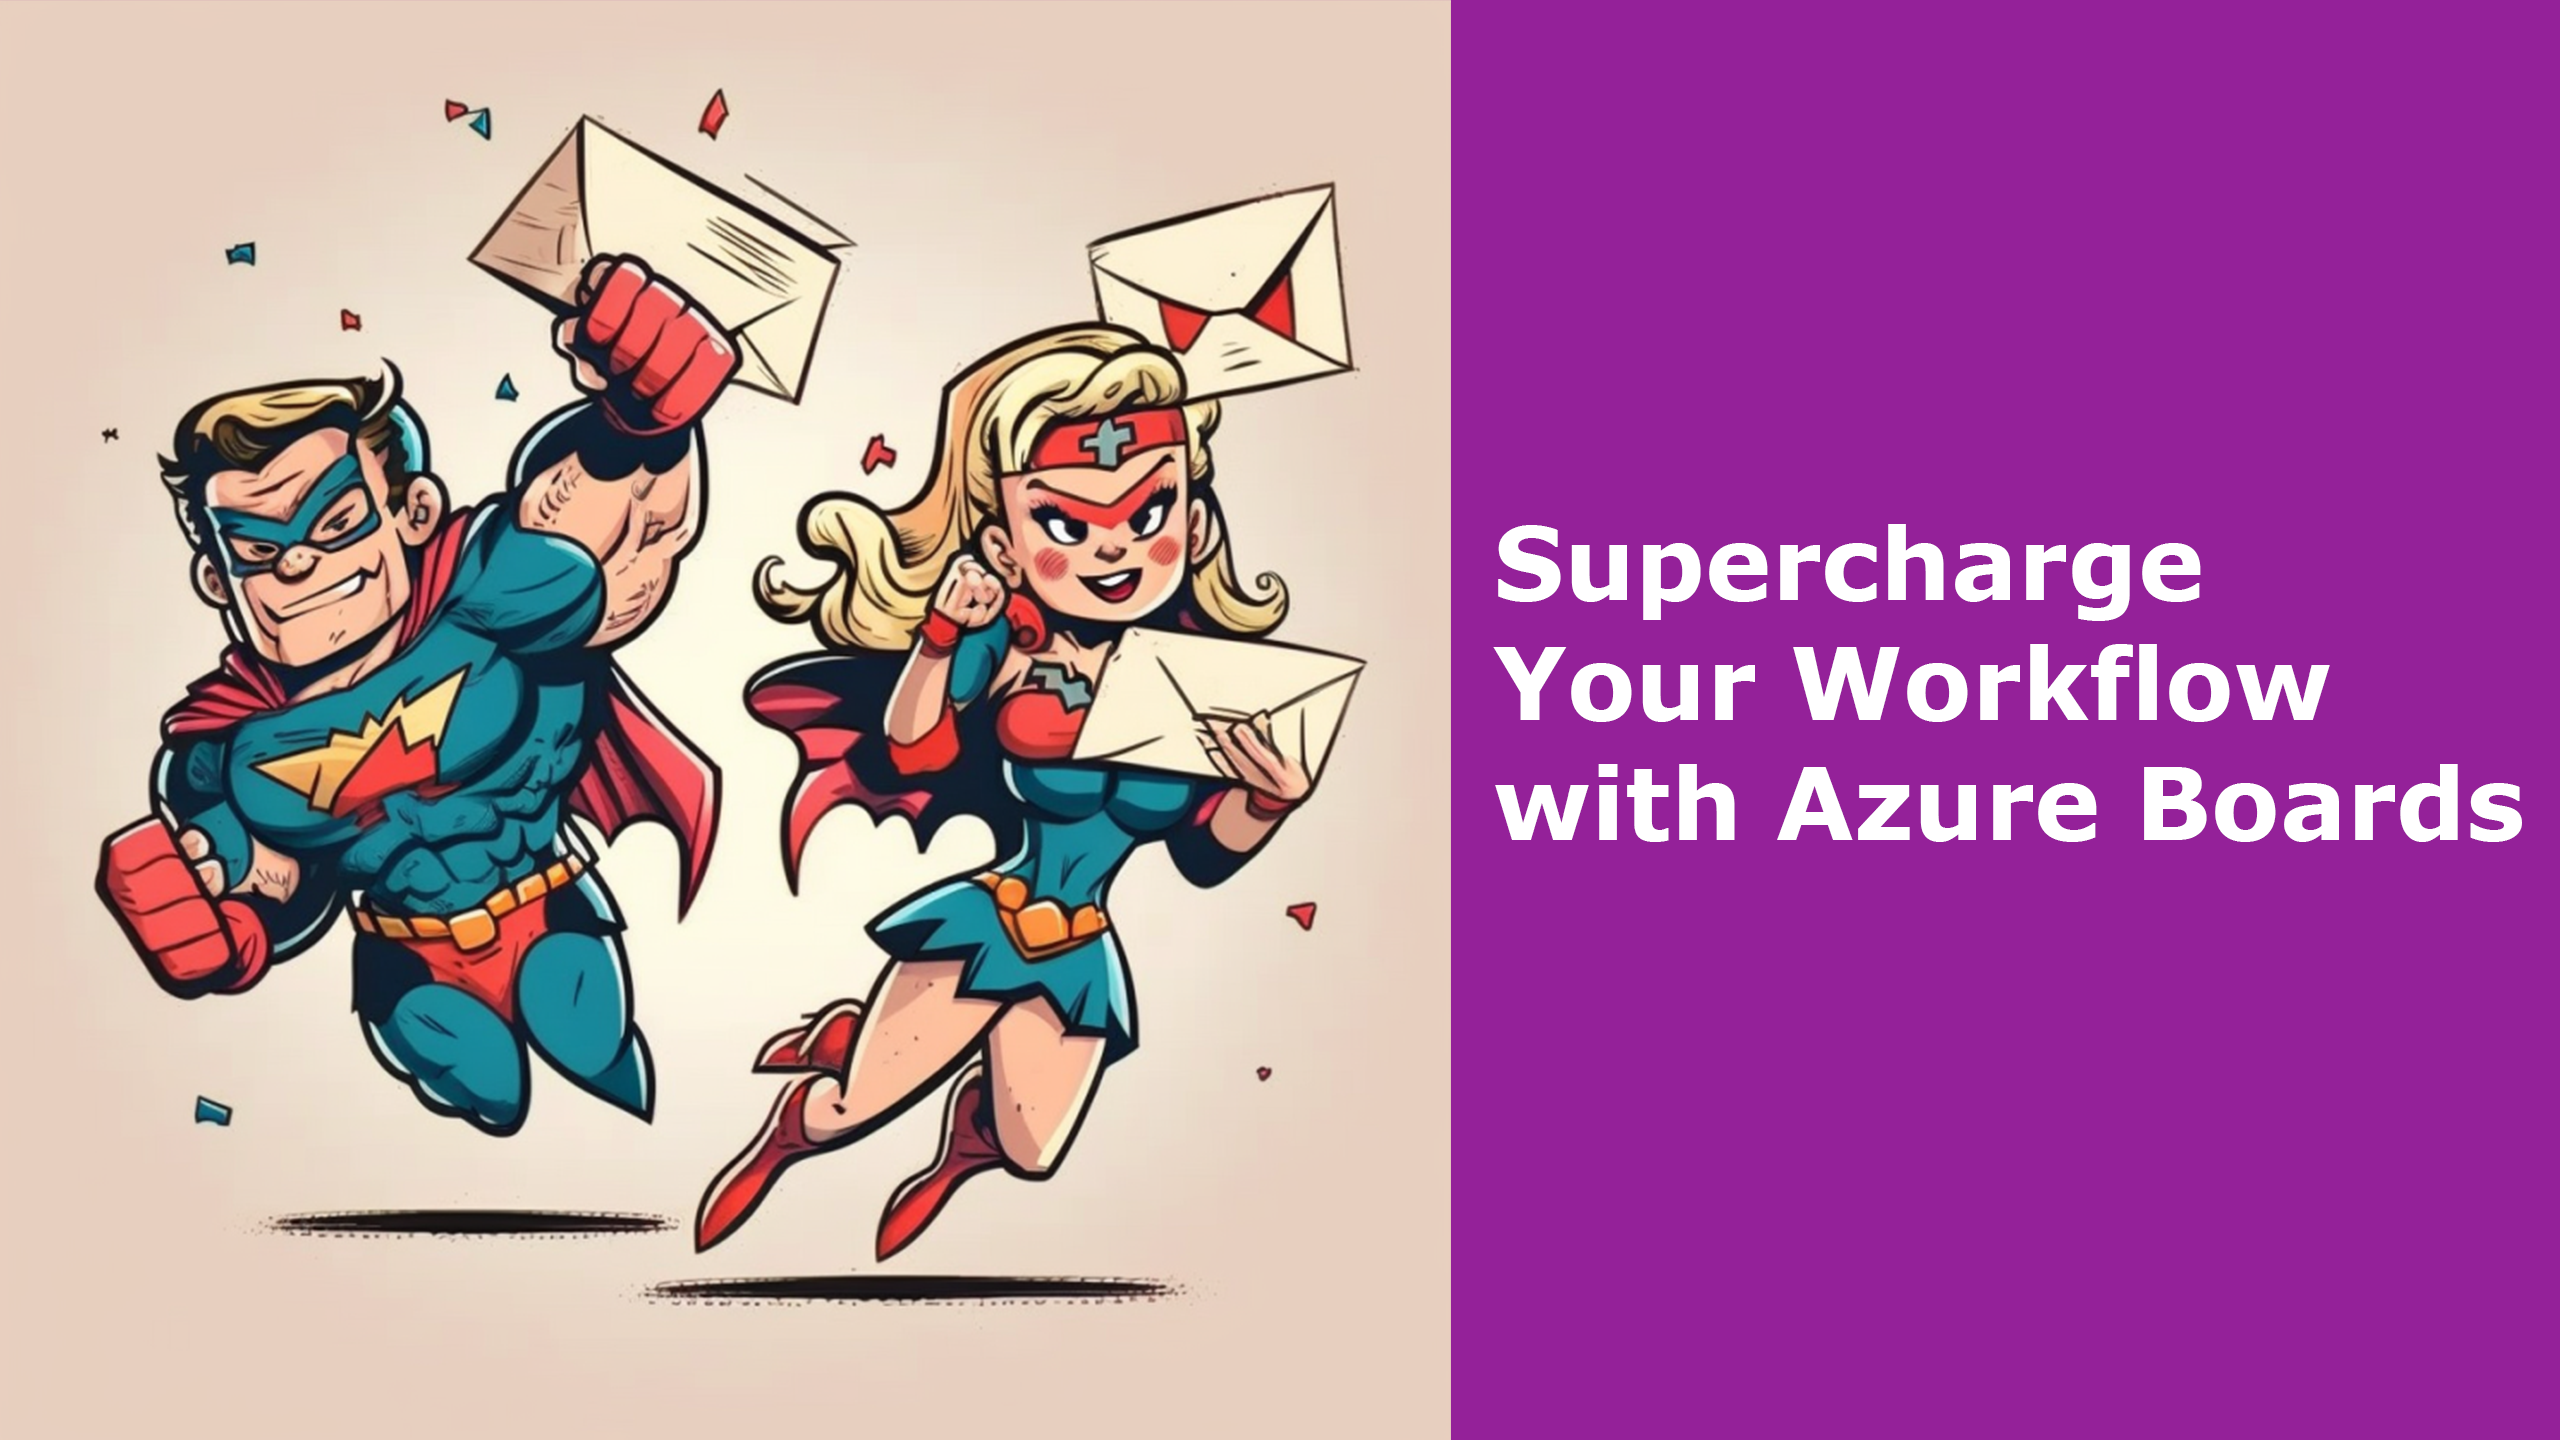 Supercharge Your Workflow with Azure Boards